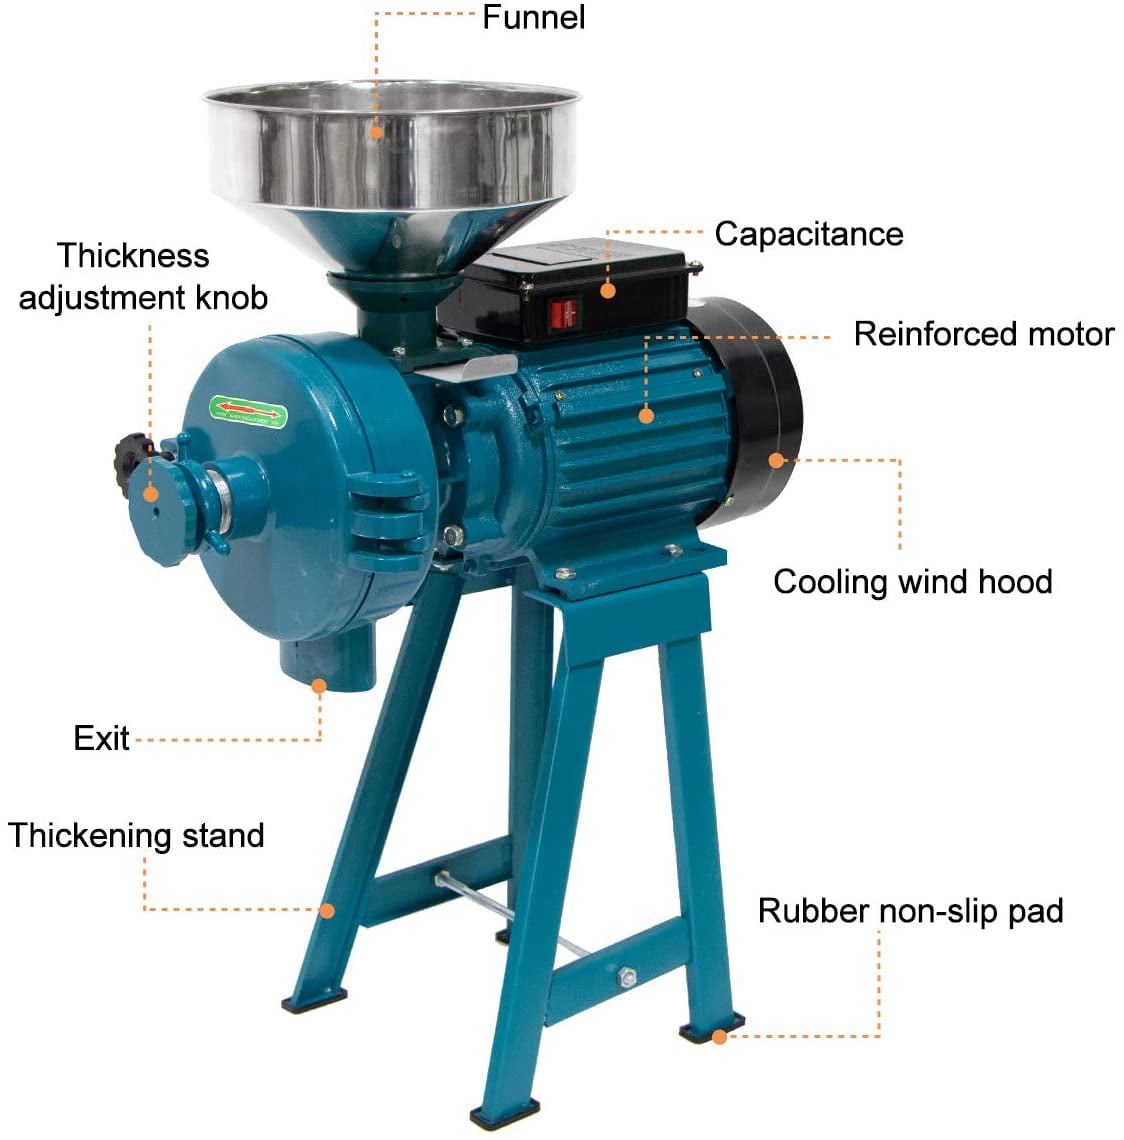 GRN-115 Electric Corn Mill and Coffee Grinder